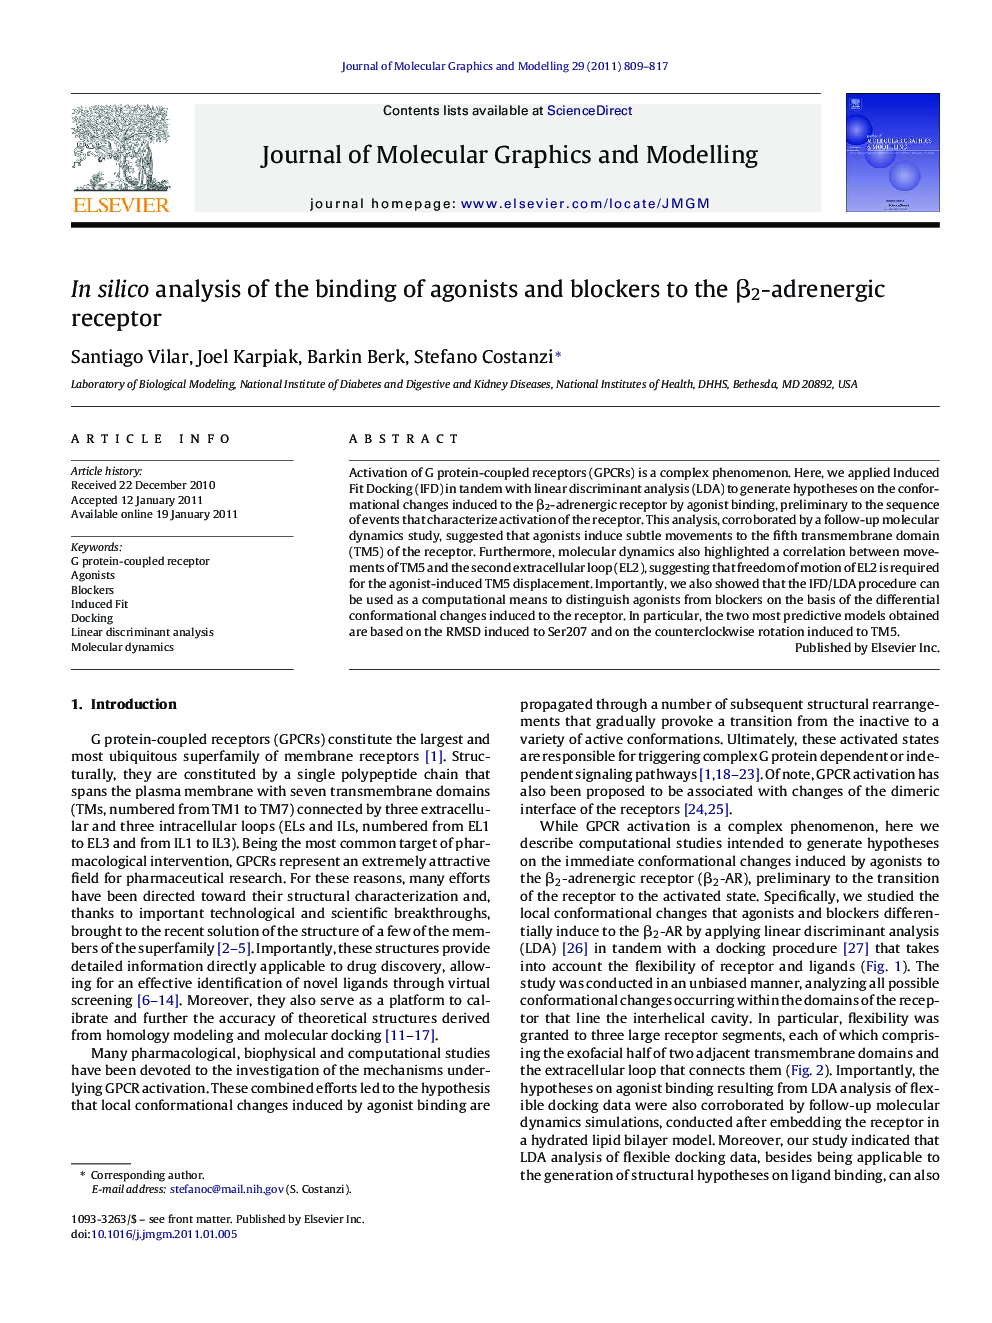 In silico analysis of the binding of agonists and blockers to the β2-adrenergic receptor